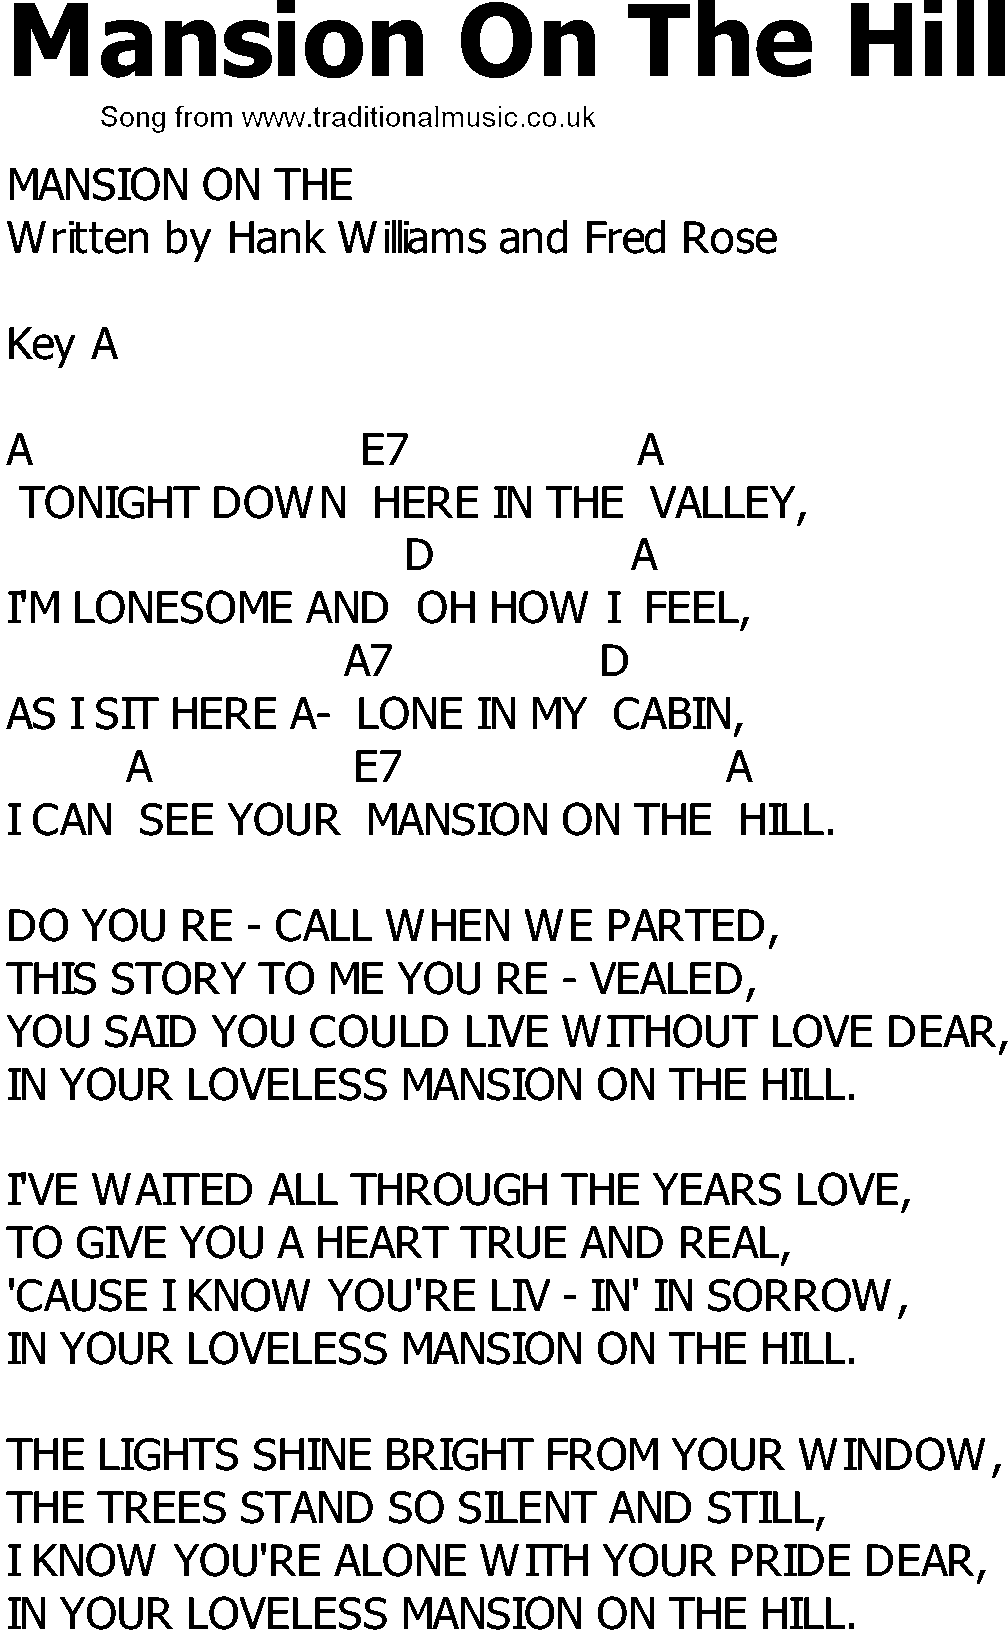 Old Country song lyrics with chords - Mansion On The Hill